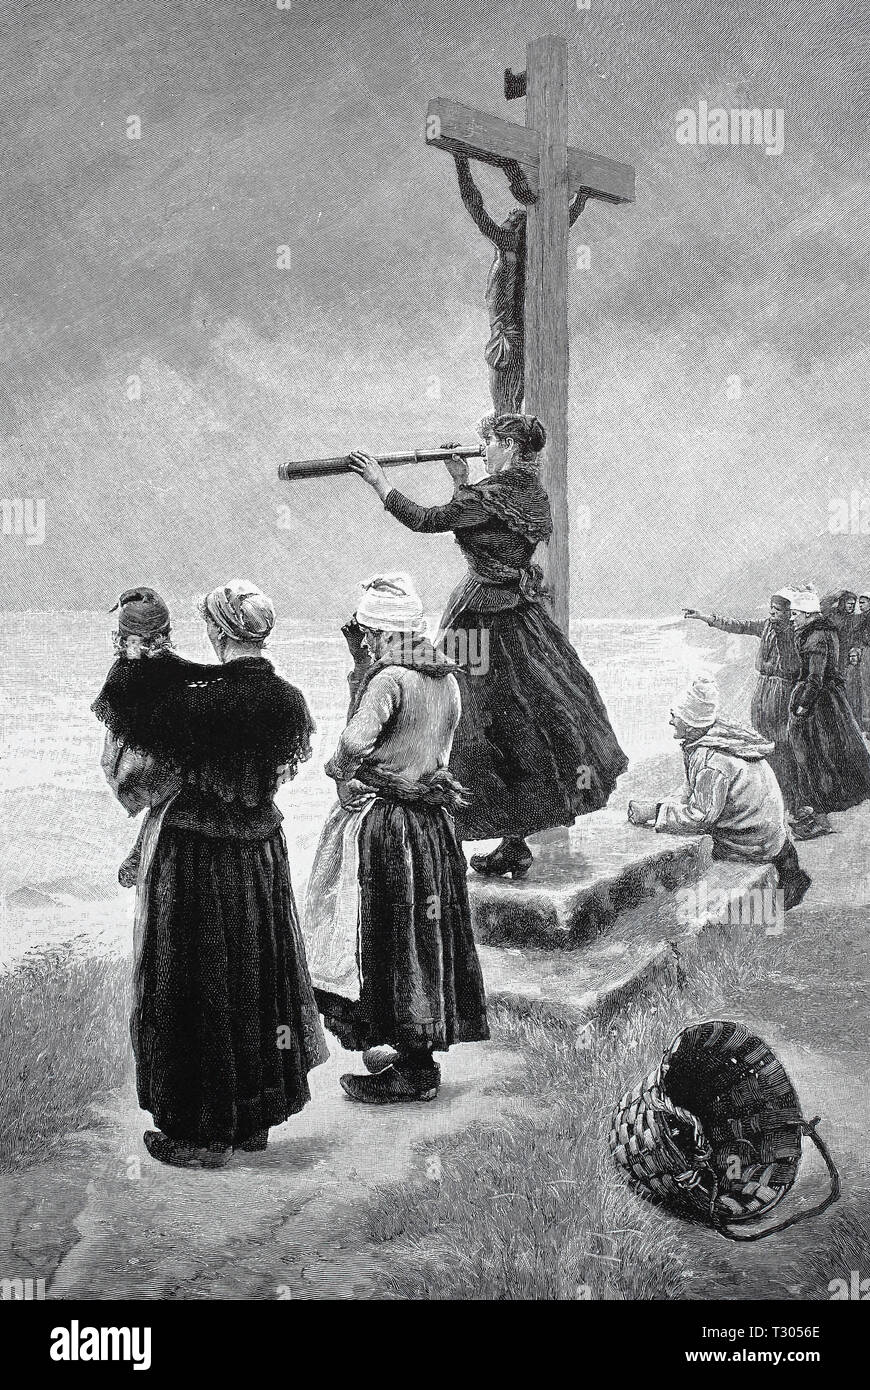 Digital improved reproduction, In anxious expectation the members of the family wait for the return of the fishing boats after a storm, the North Sea, crucifix in the harbour, In banger Erwartung warten die Familienangehörigen auf die Rückkehr der Fischerboote nach einem Sturm, Nordsee, Kruzifix am Hafen, from an original print from the 19th century Stock Photo